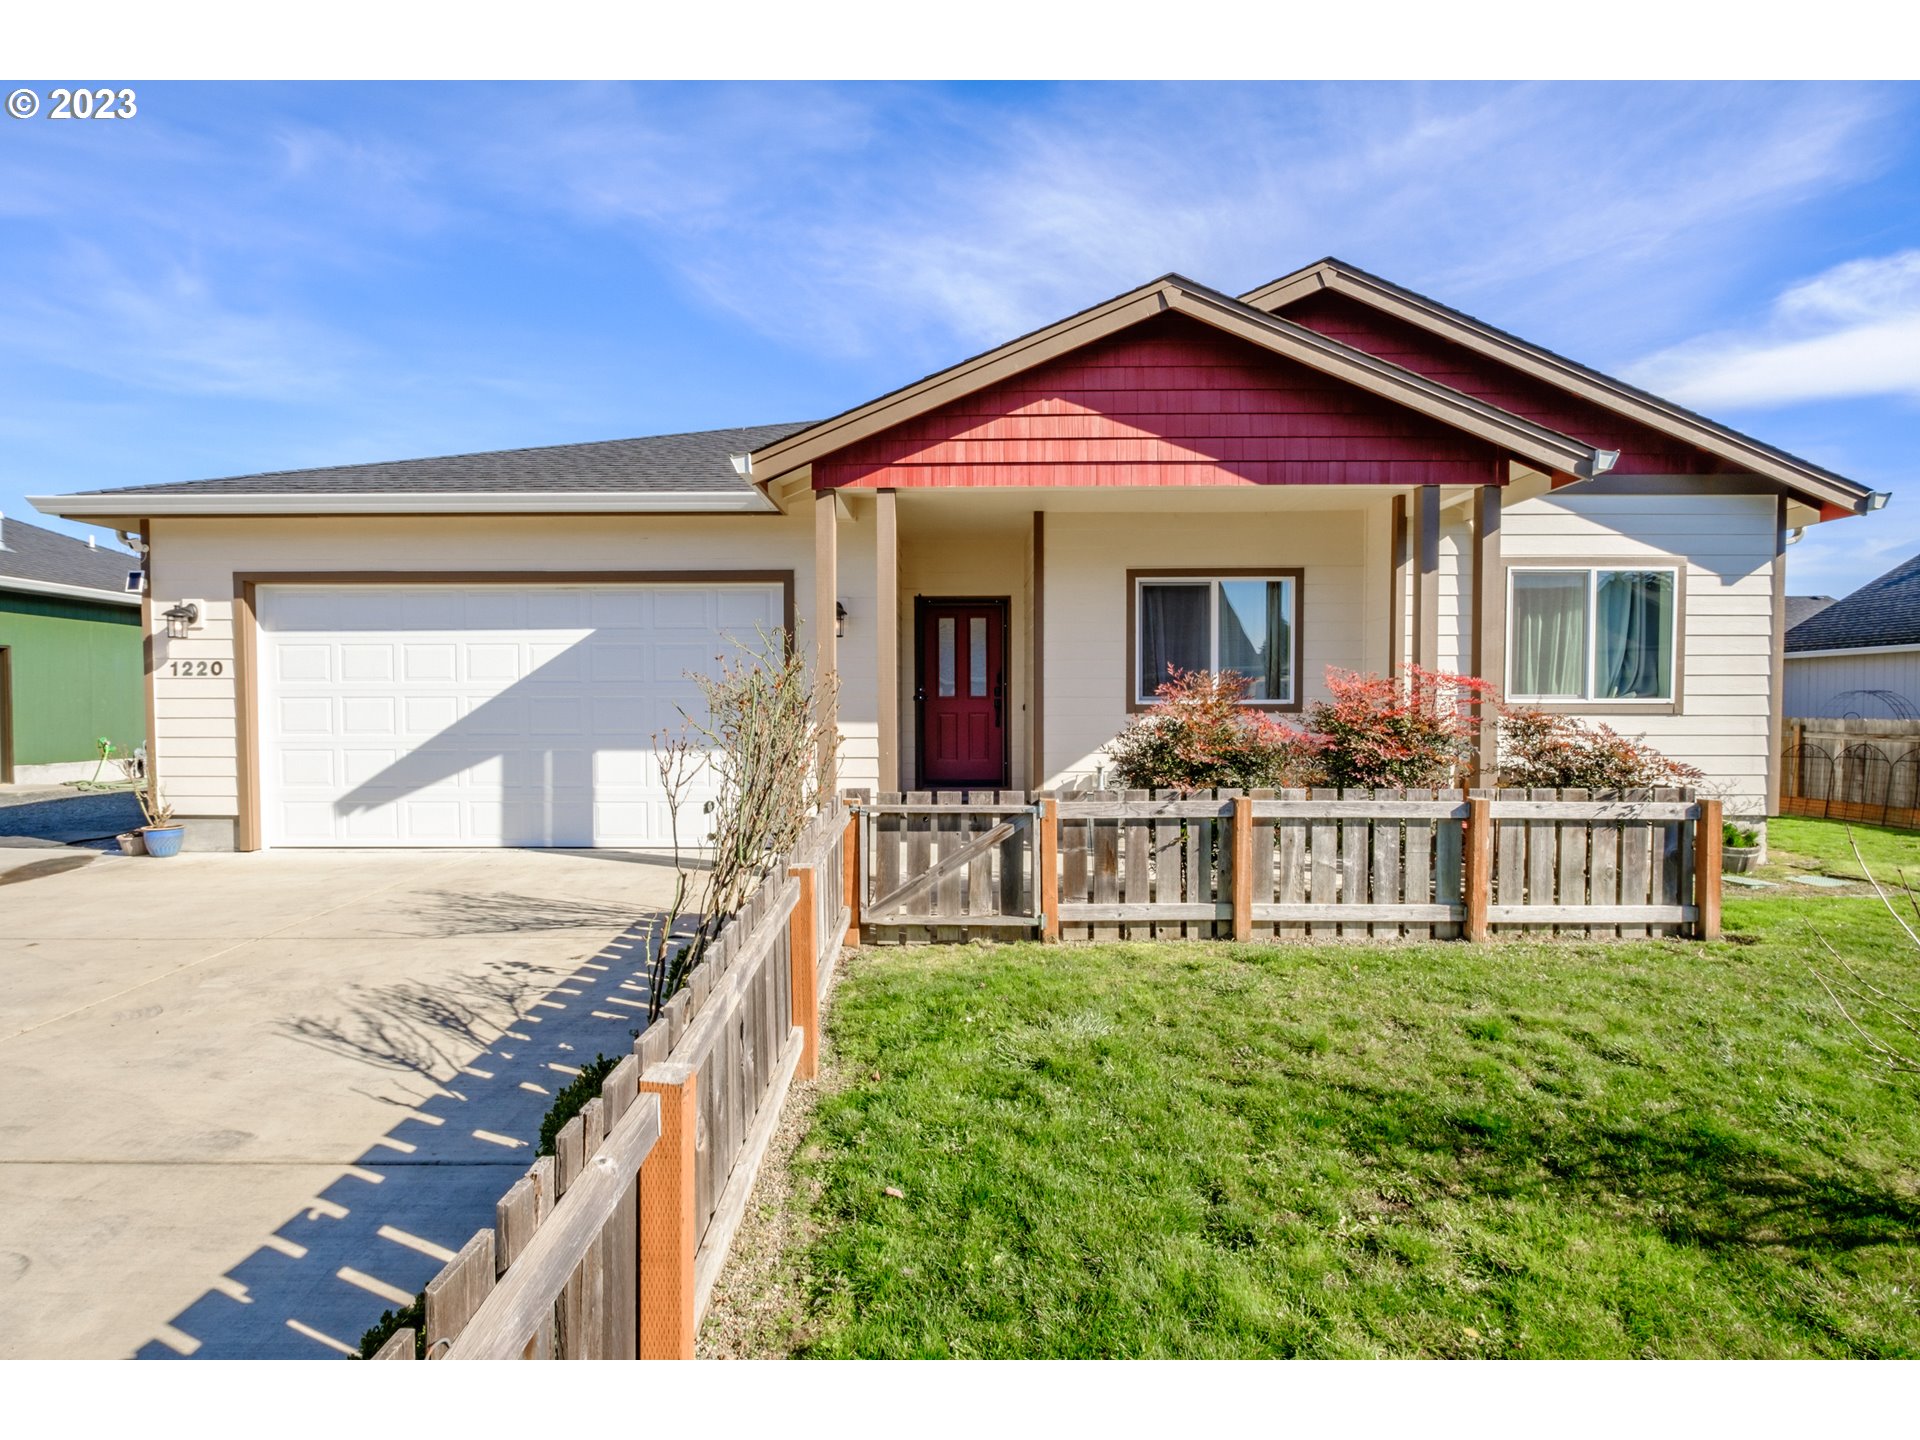 This newer well-cared for one-level home is off the main road & located on a quiet pan-handle lot. This might be just what you are looking for! Featuring 9? foot ceilings, stainless steel/gas appliances, large island, open concept living/dining/kitchen area, sliding glass door off dining area onto a covered patio which leads into a nice size yard, great separation of bedrooms, large primary with walk-in closet and bathroom. Do you need extra parking, easy access RV/Trailer parking, an area for raised garden beds or a shed? There is plenty of room. Motived seller!! Schedule an appointment today to view and make this your new home!!